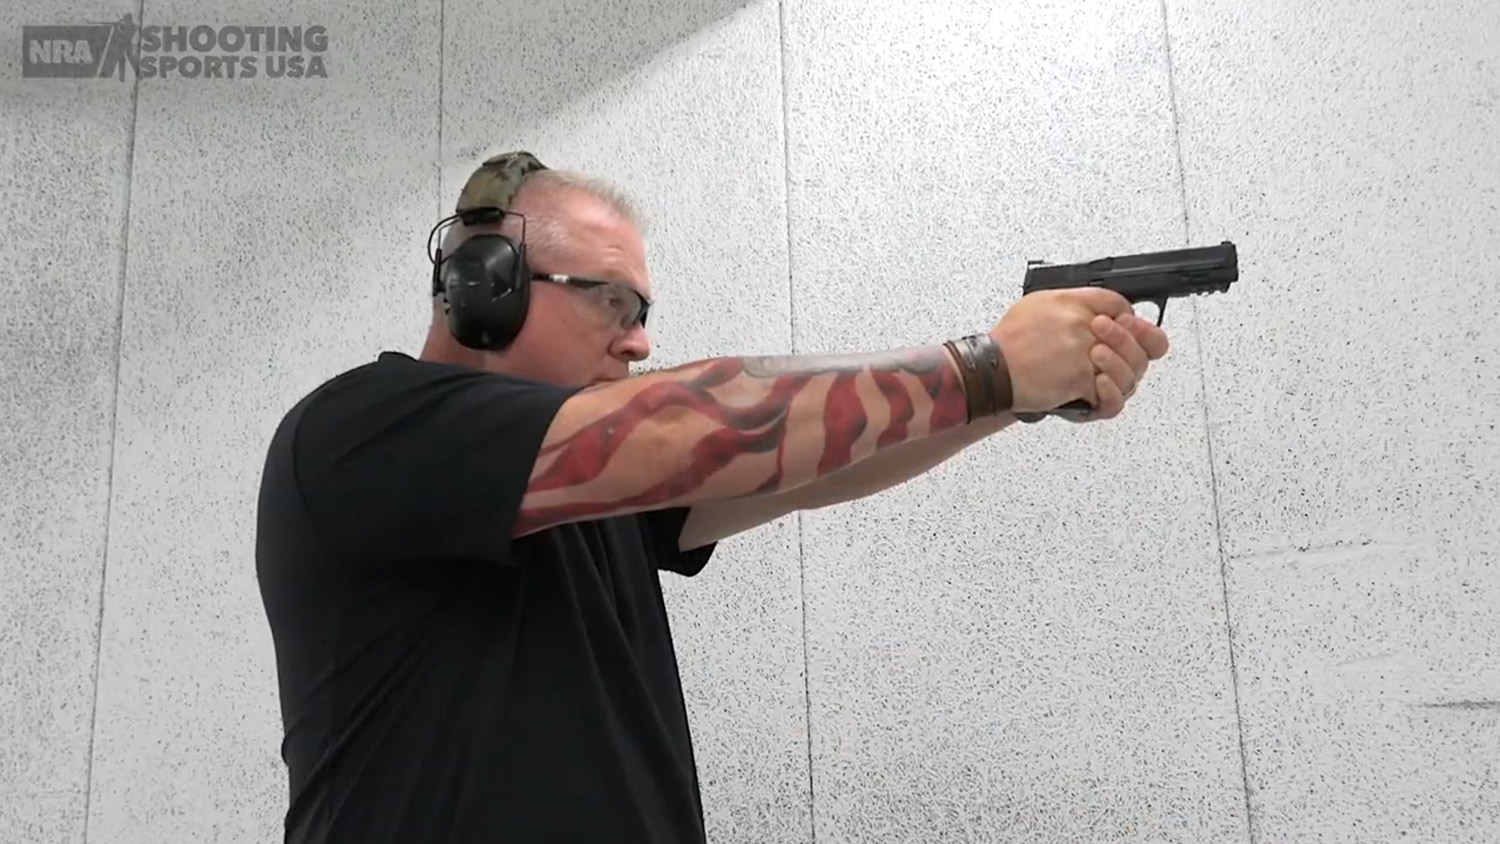 Brian Zins, 12-time NRA national pistol champion